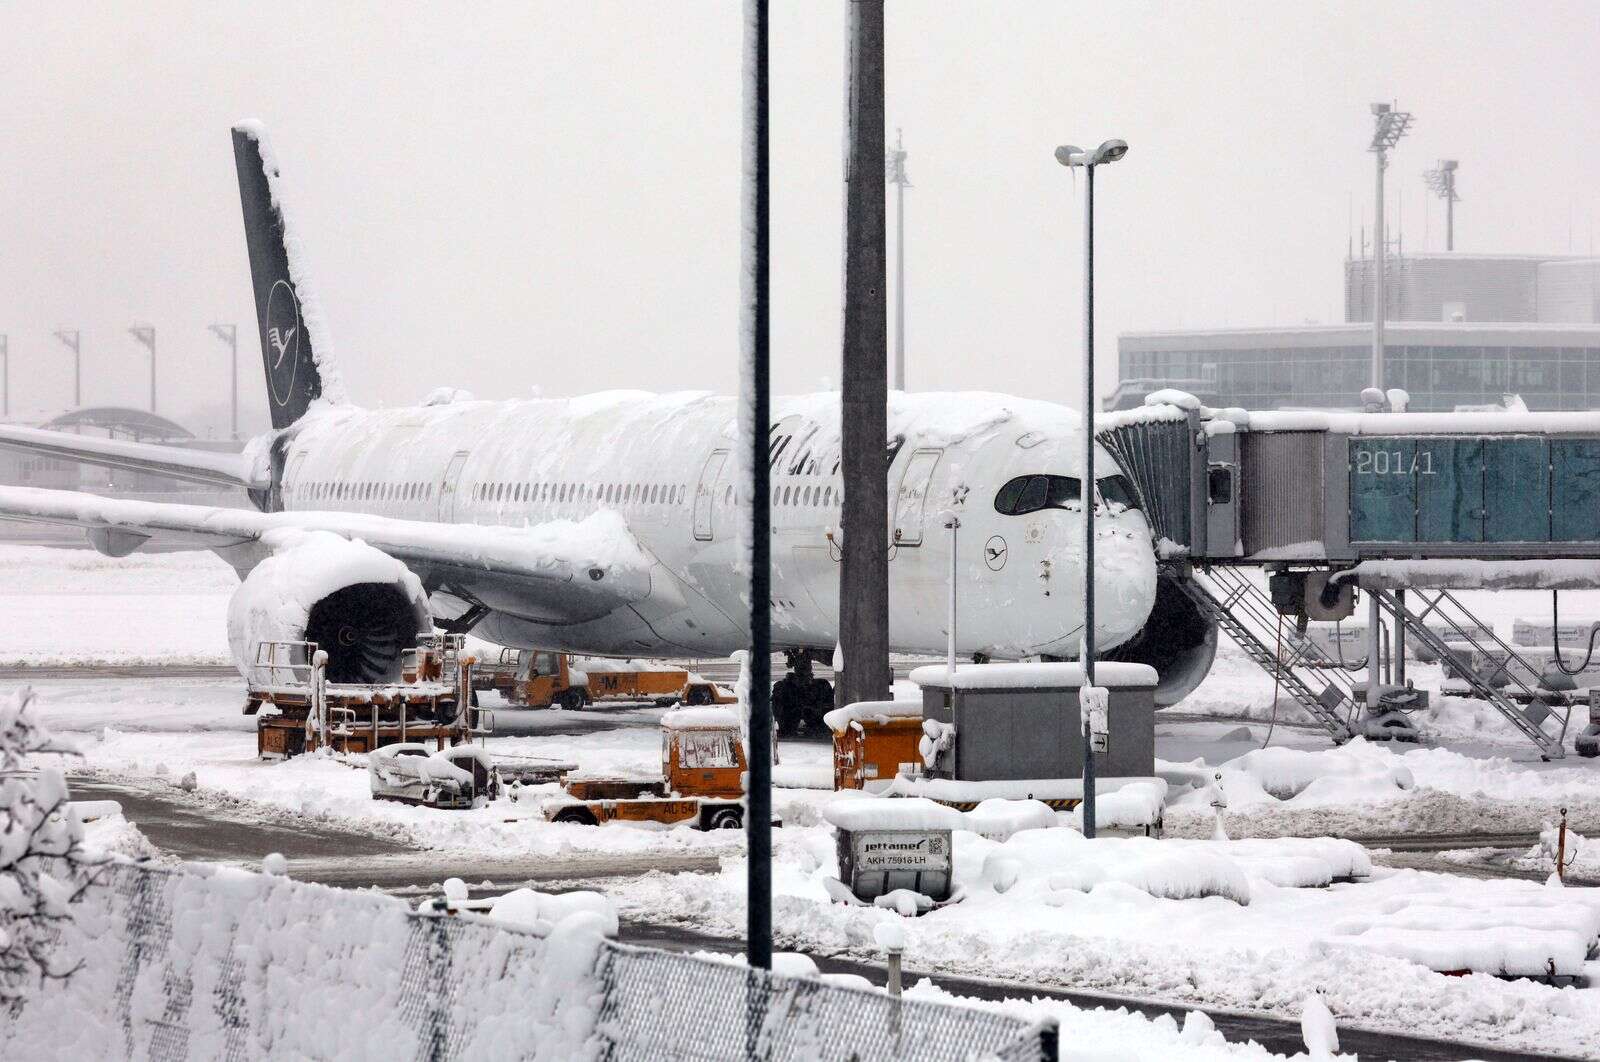 A Lufthansa aircraft parked at the snow-covered Munich airport in Germany